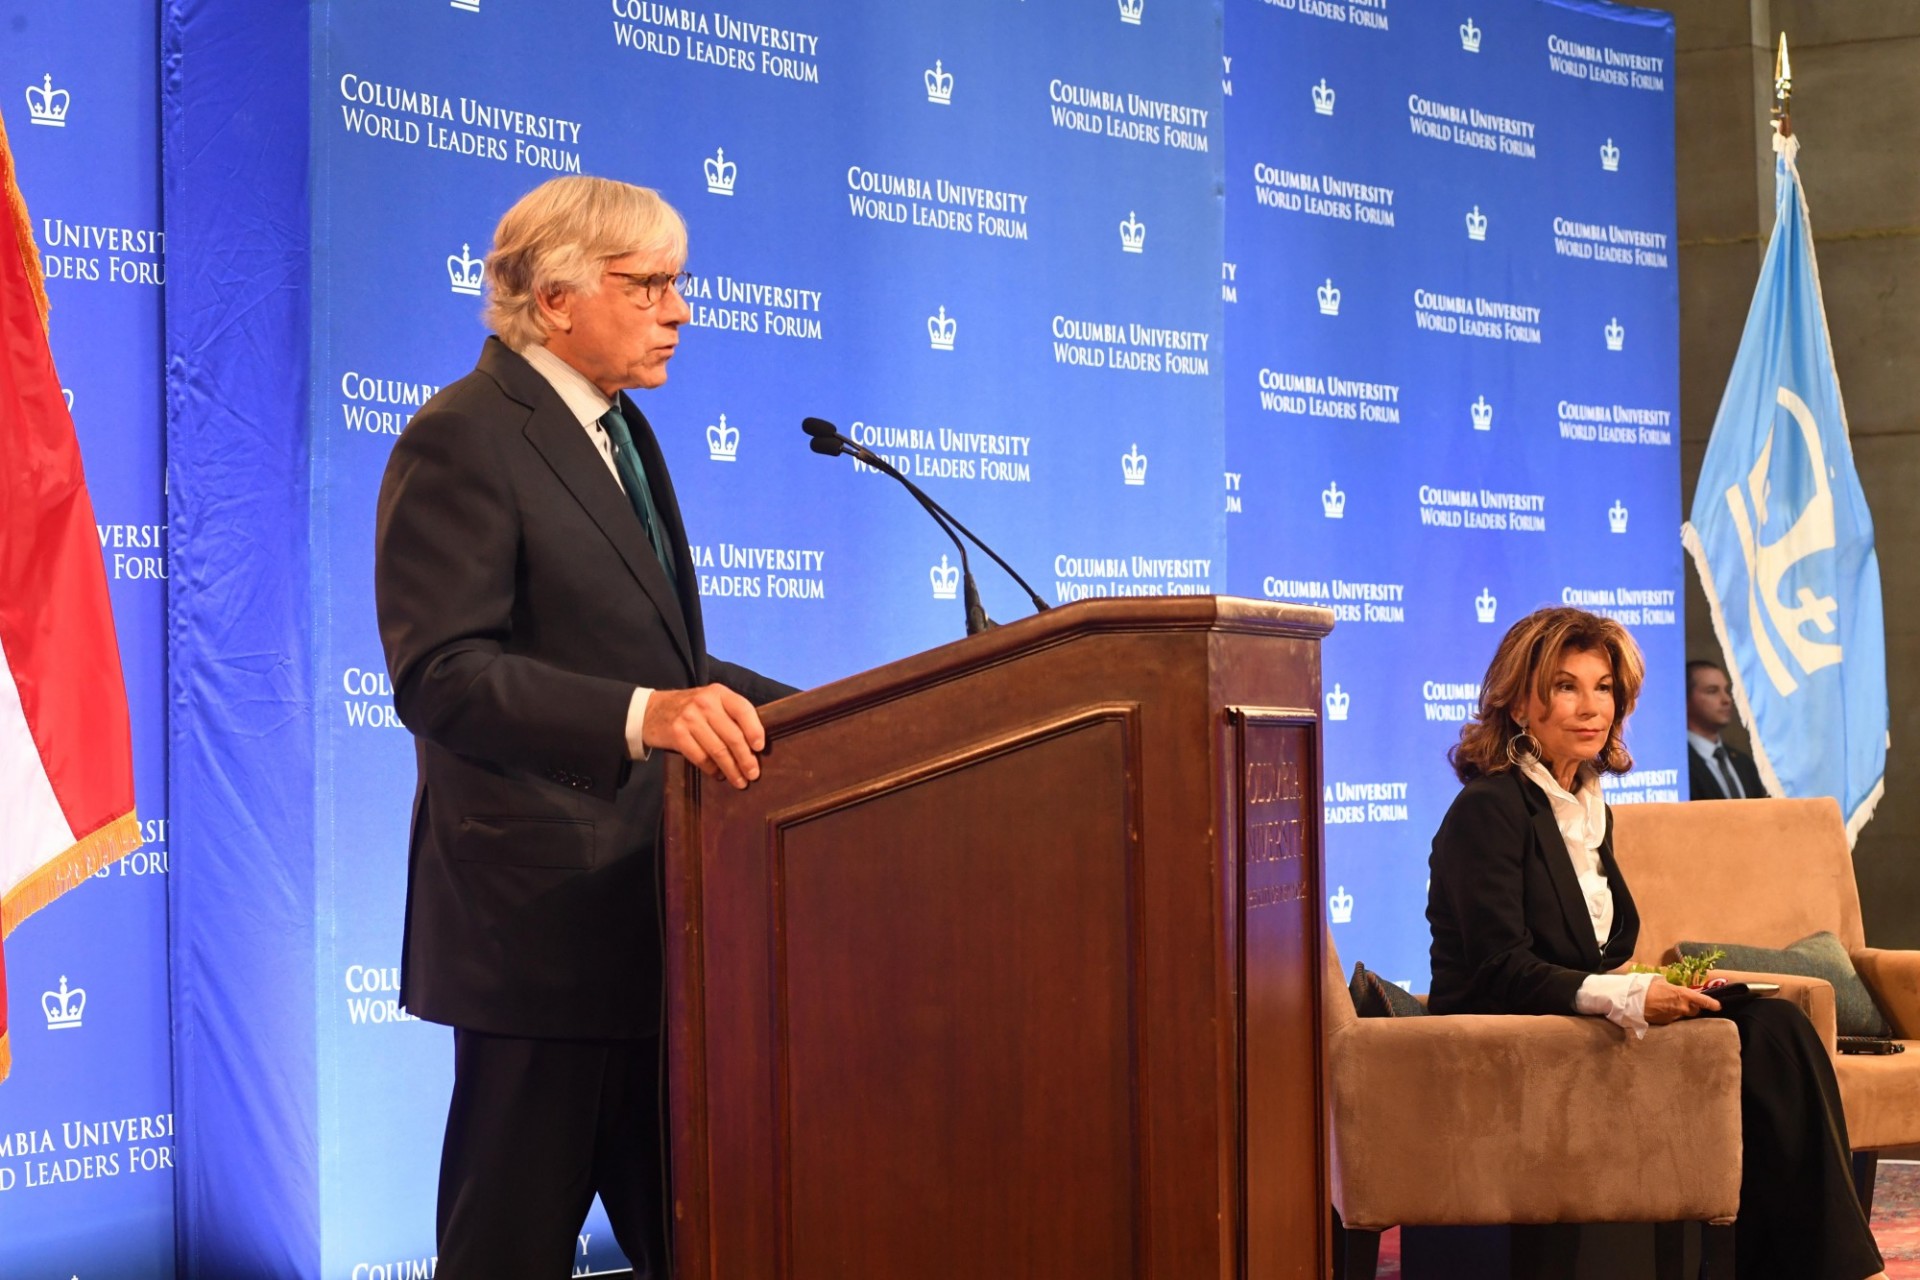 Lee C. Bollinger, President, Columbia University in the City of New York begins the World Leaders Forum with an introduction of Federal Chancellor Brigitte Bierlein of the Republic of Austria.